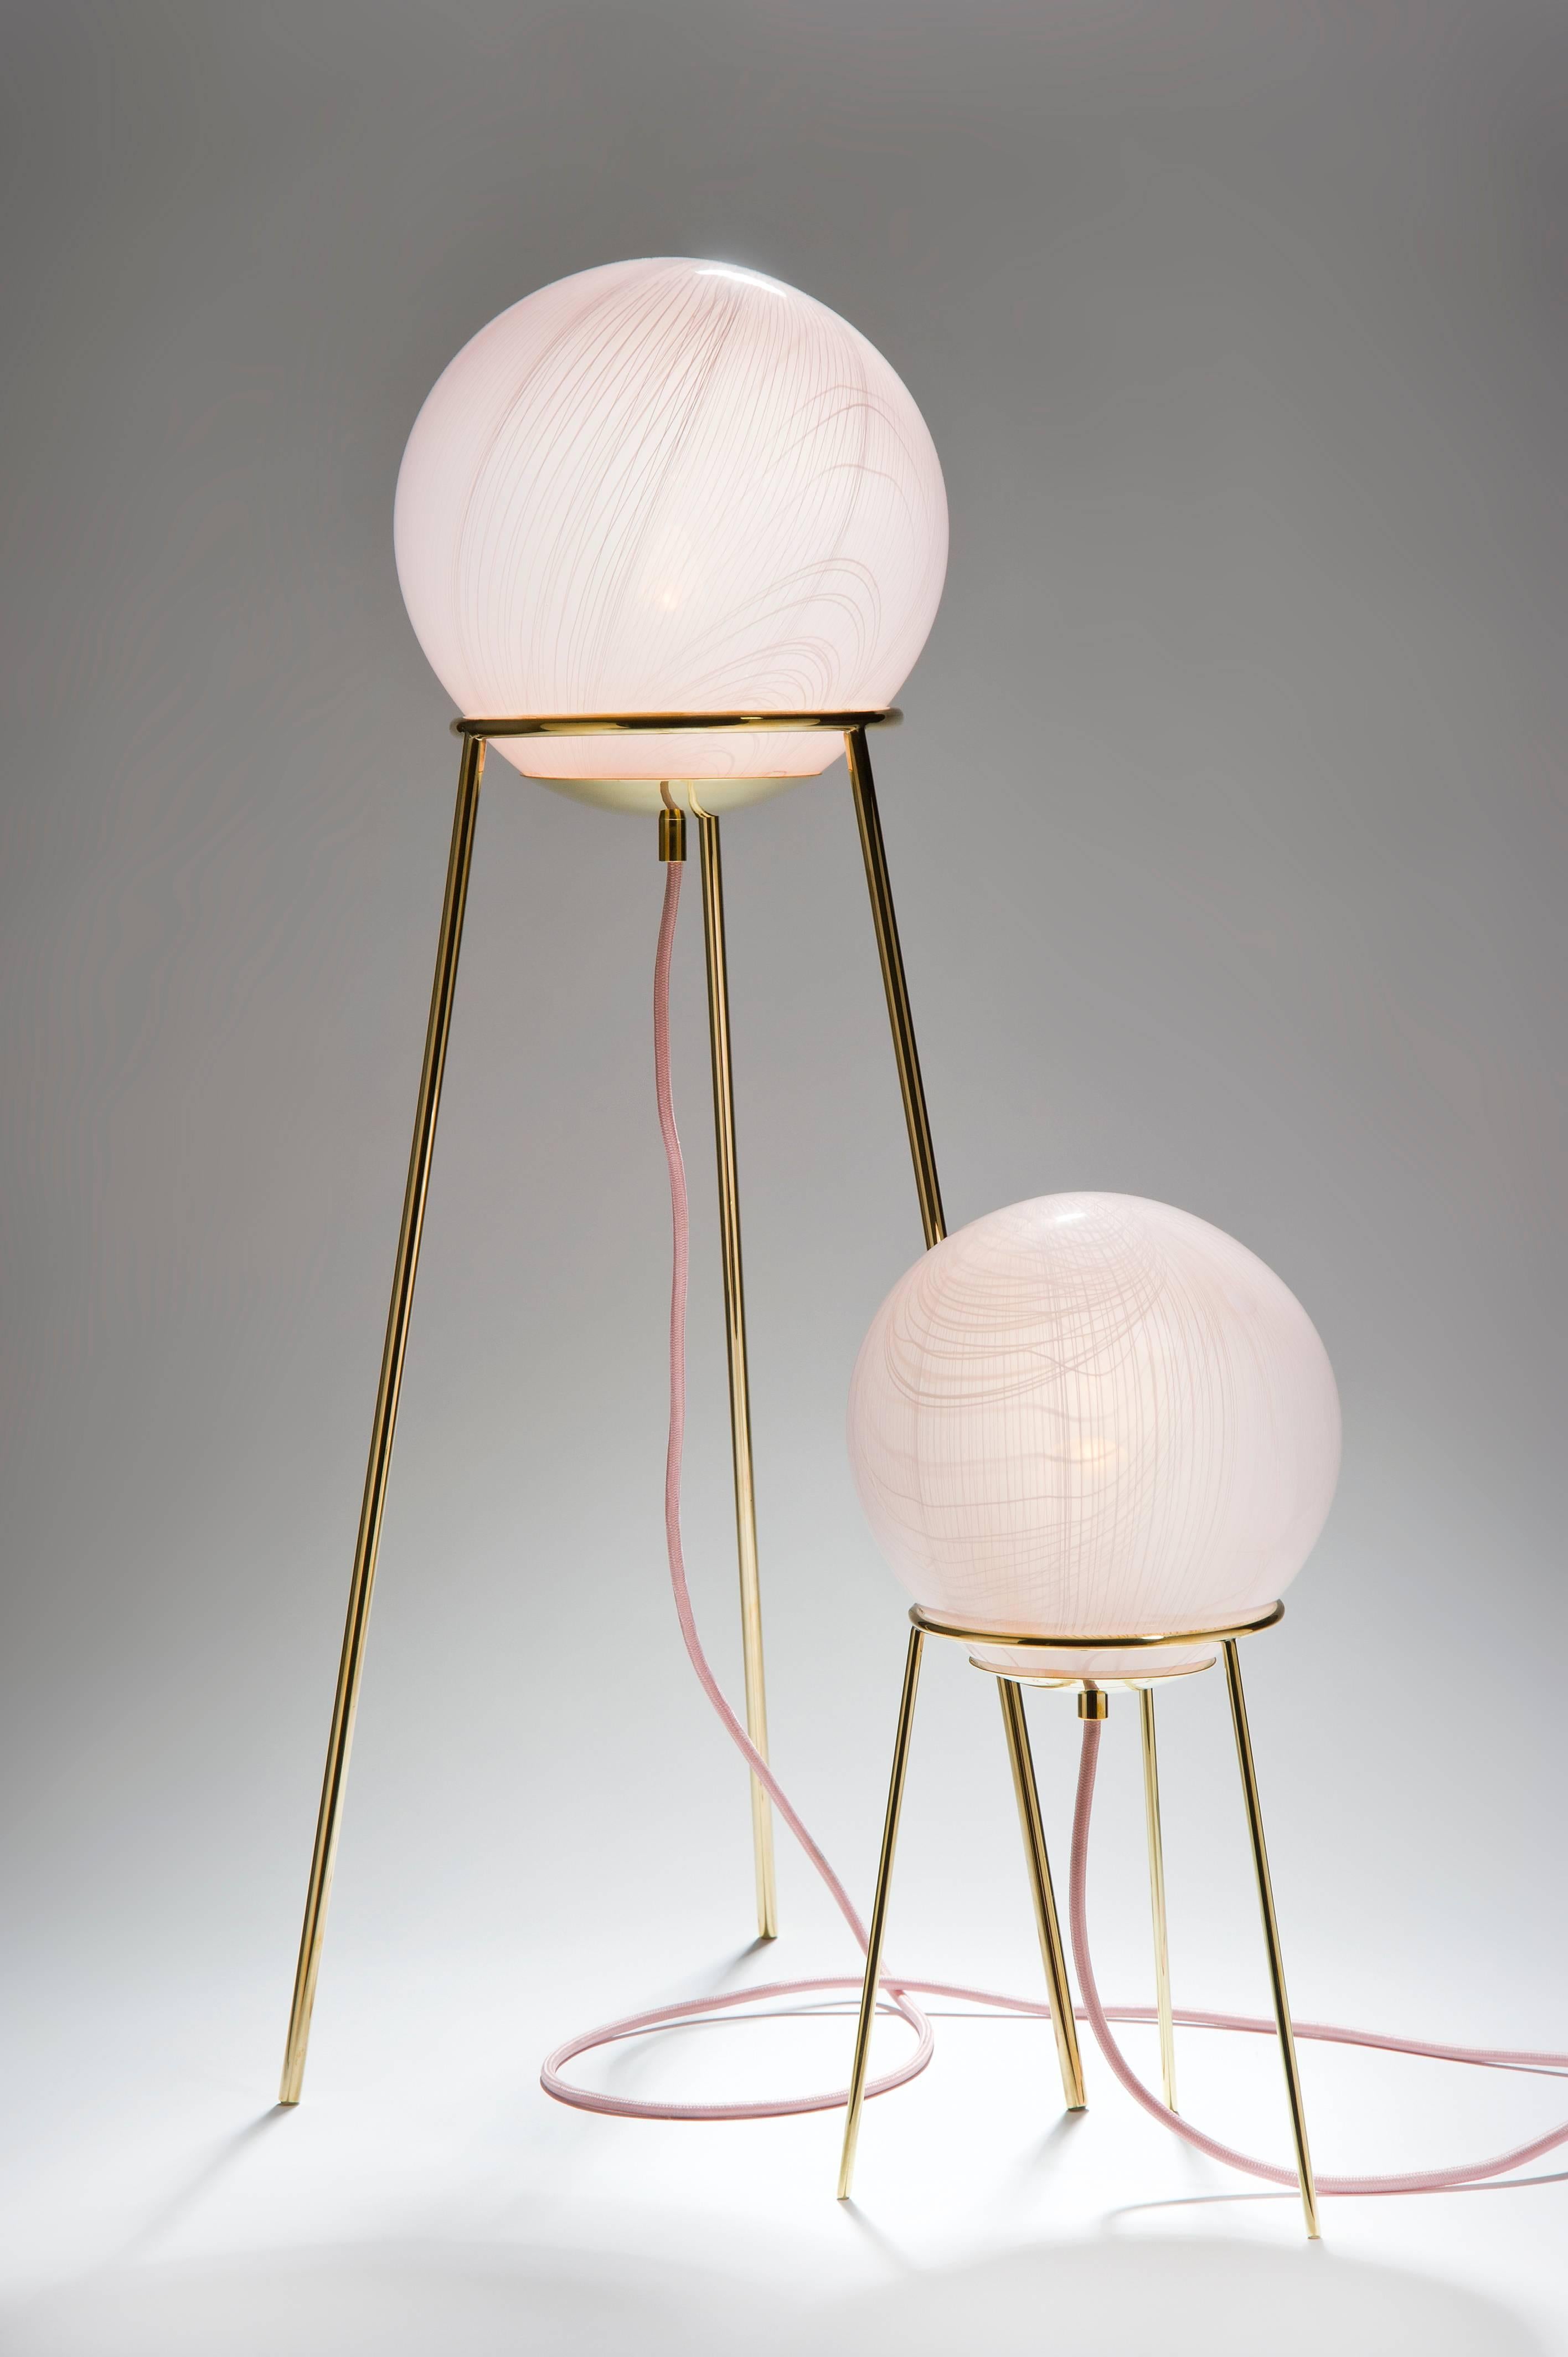 
Handblown glass globes in soft pink opal with 'canne' patterning, bespoke brass base.
Available in two sizes and pastel colours, mint green and pale pink. Handmade to order, each one totally unique due to the handblown glass technique. Available in